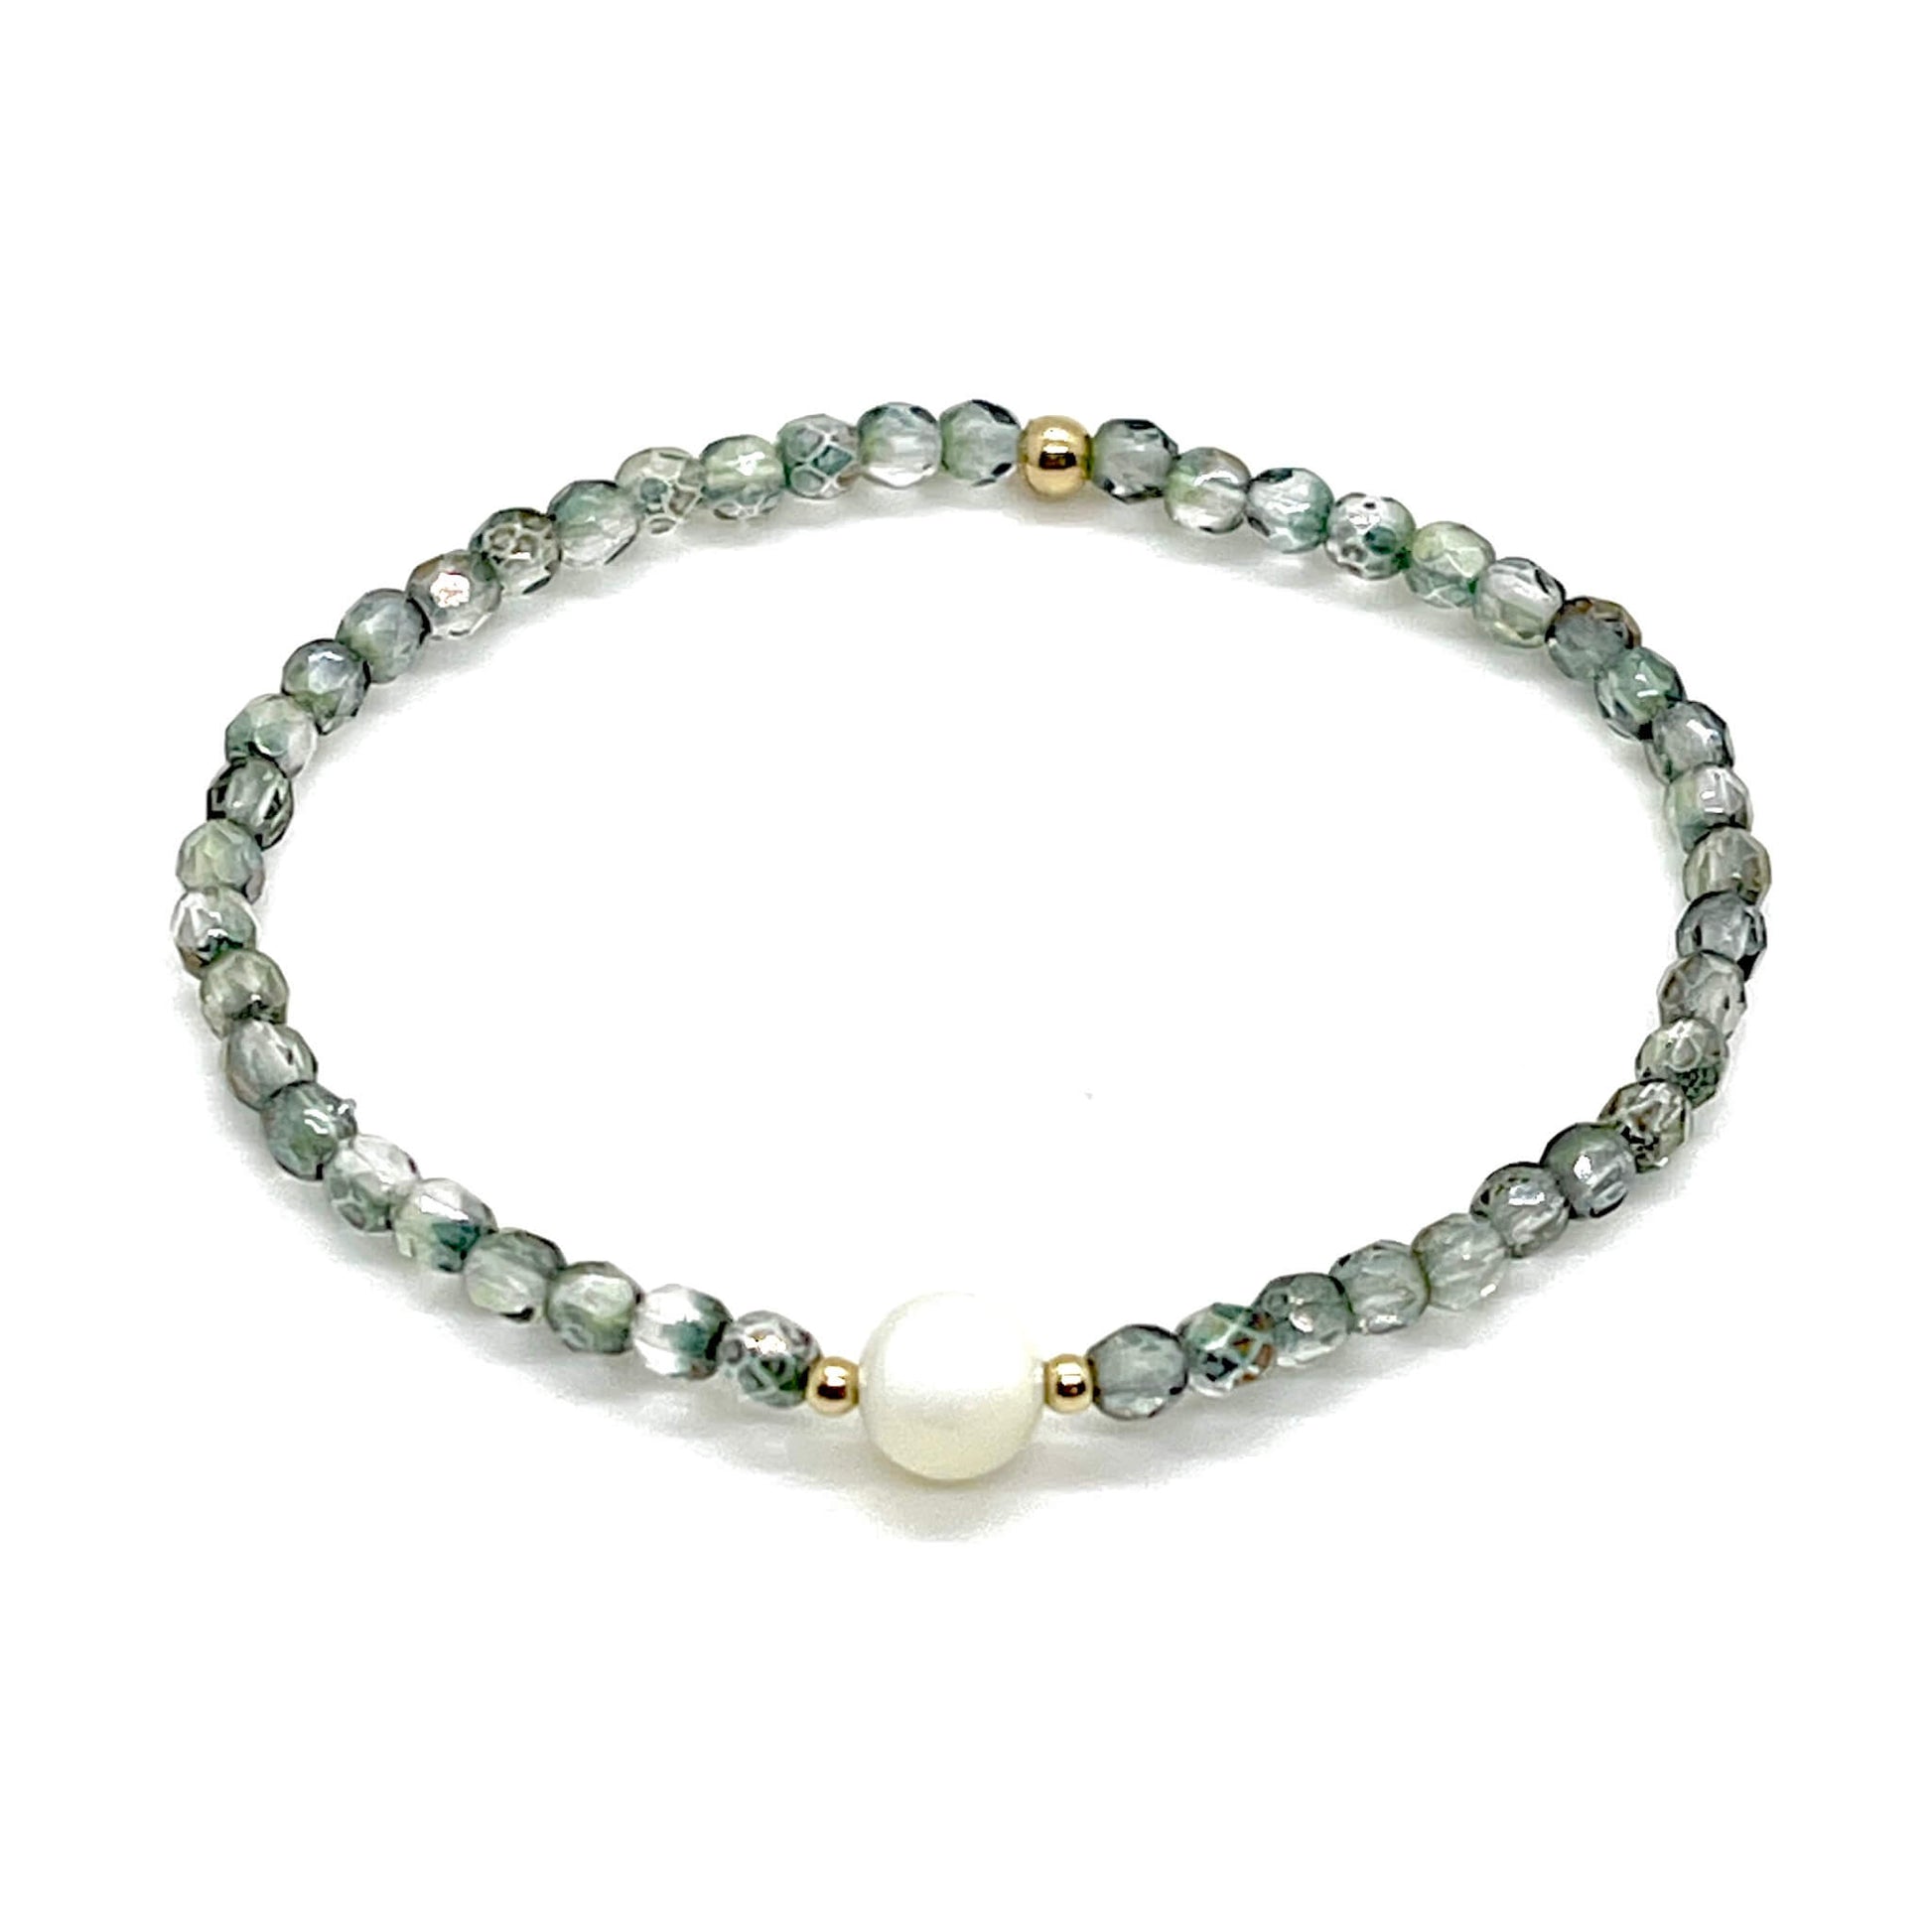 Green-grey crystal bracelet with mother-of-pearl center bead and small gold accent beads.